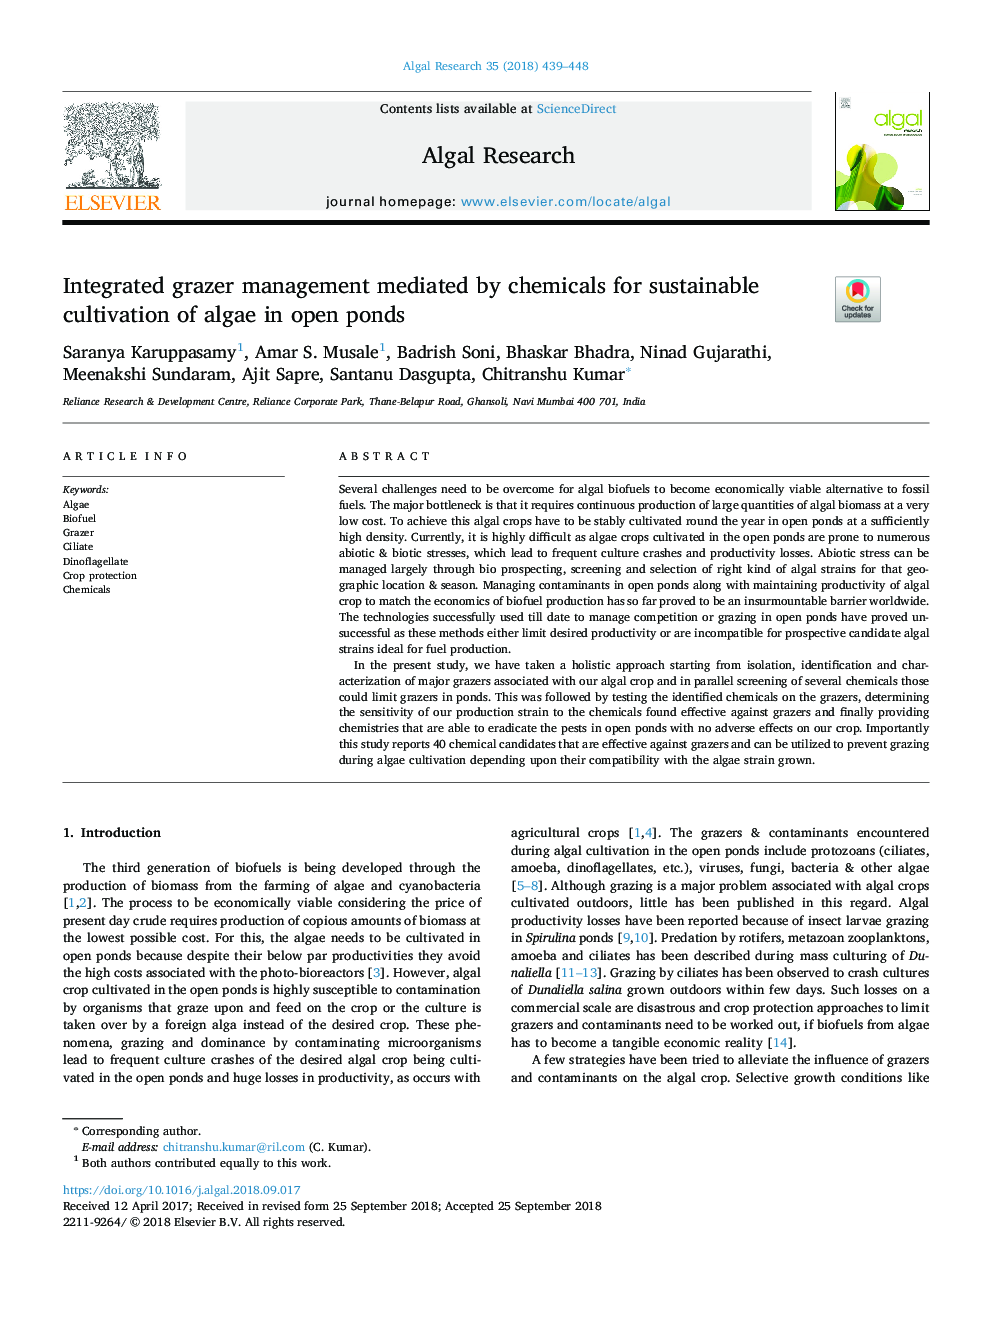 Integrated grazer management mediated by chemicals for sustainable cultivation of algae in open ponds